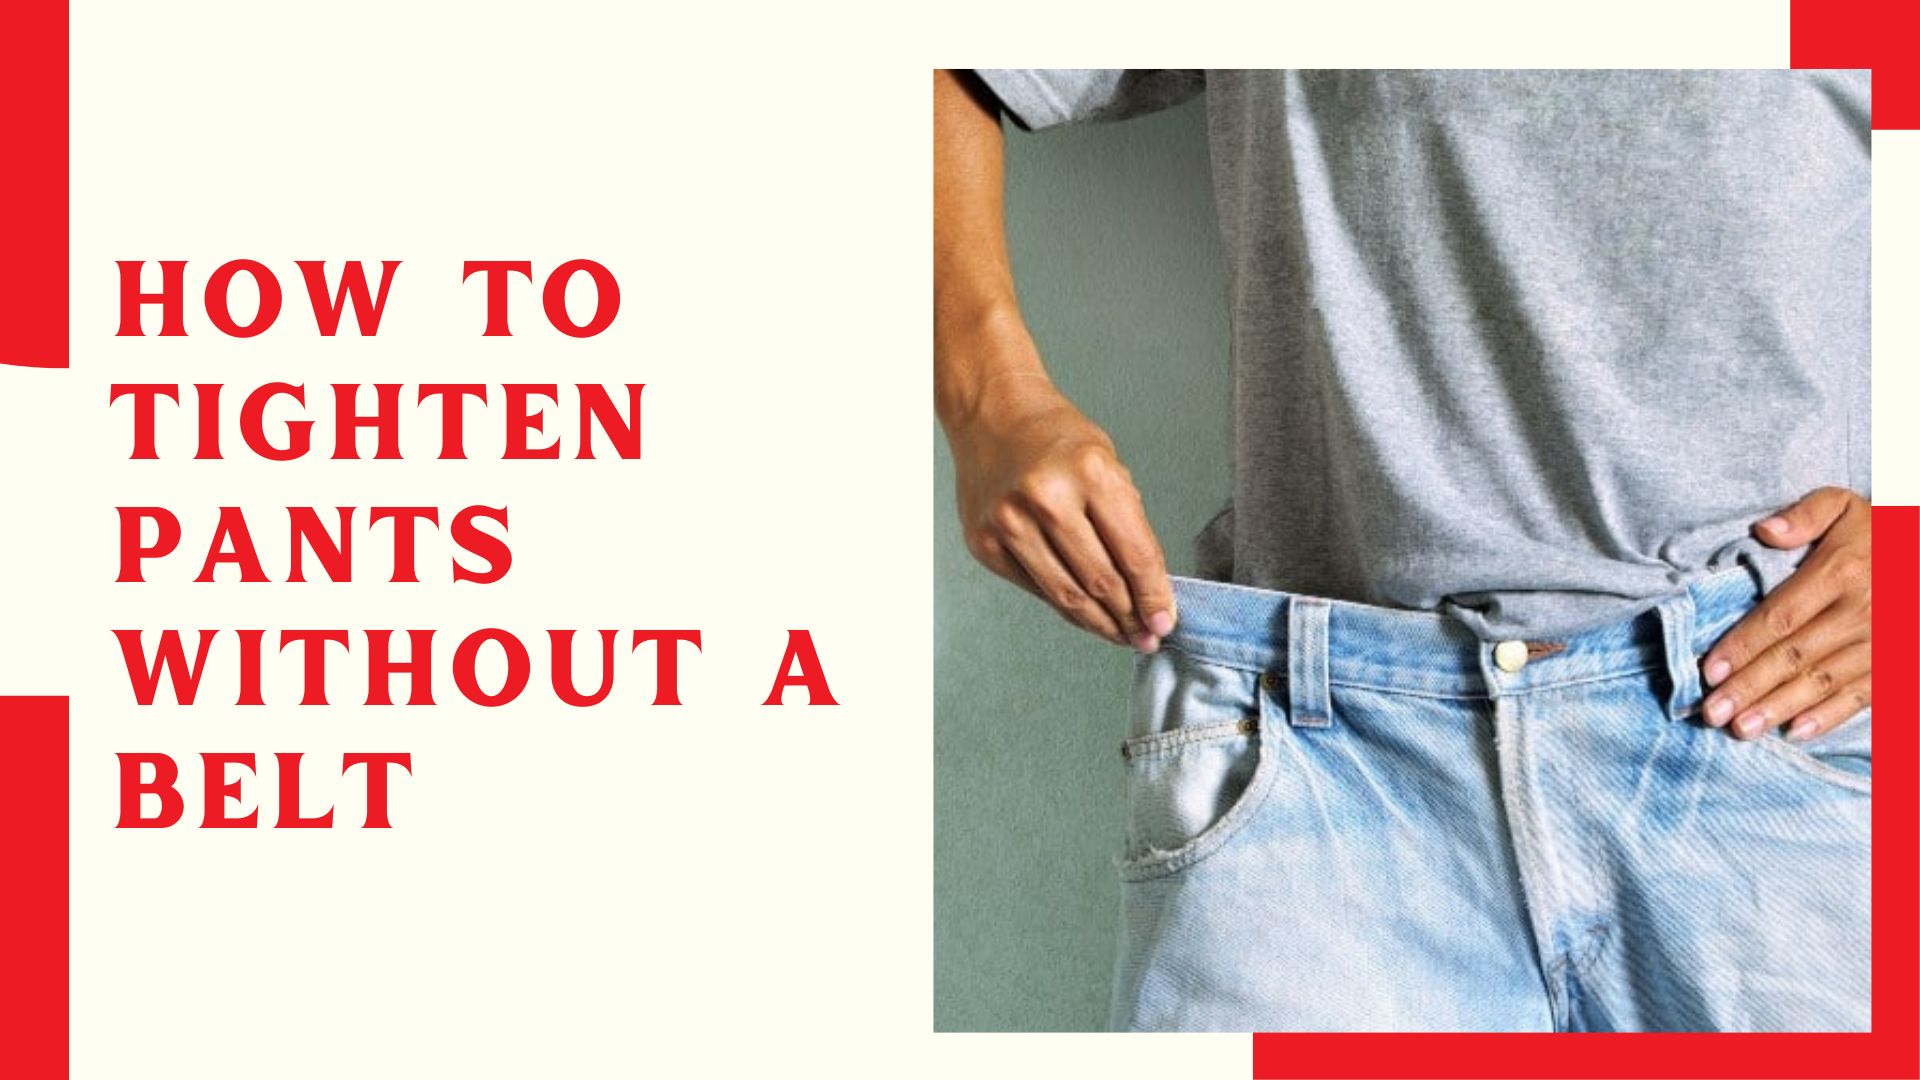 How To Tighten Pants Without A Belt